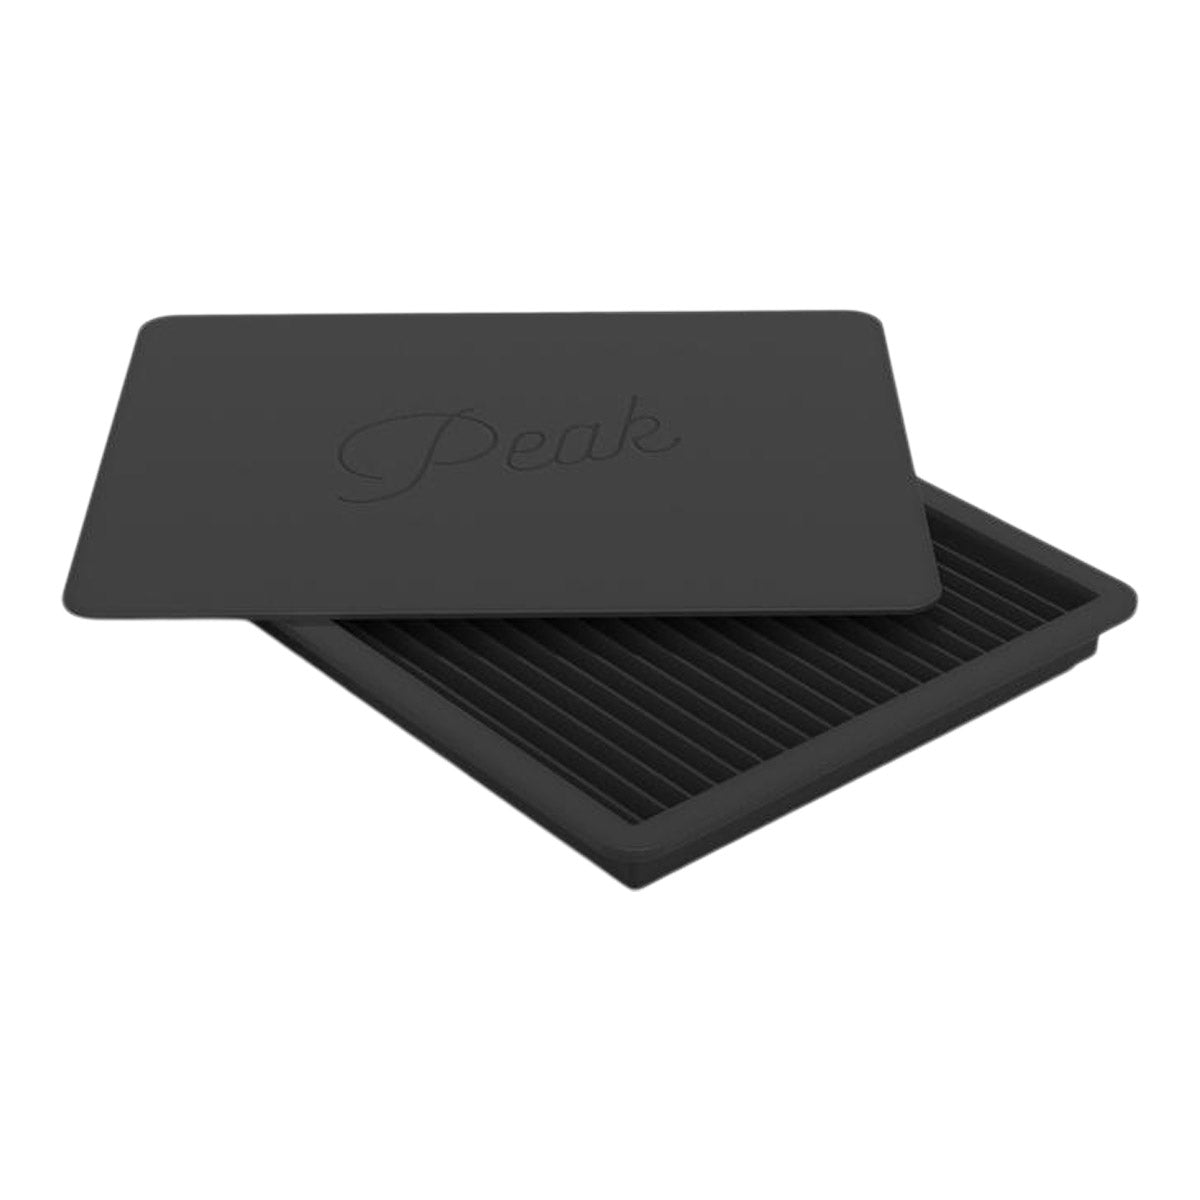 https://cdn.shopify.com/s/files/1/0672/8799/products/CrushedIceTray_0fdfc0ac-f6e0-463e-8218-ef4a17e7b99b.jpg?v=1623790655&width=1200